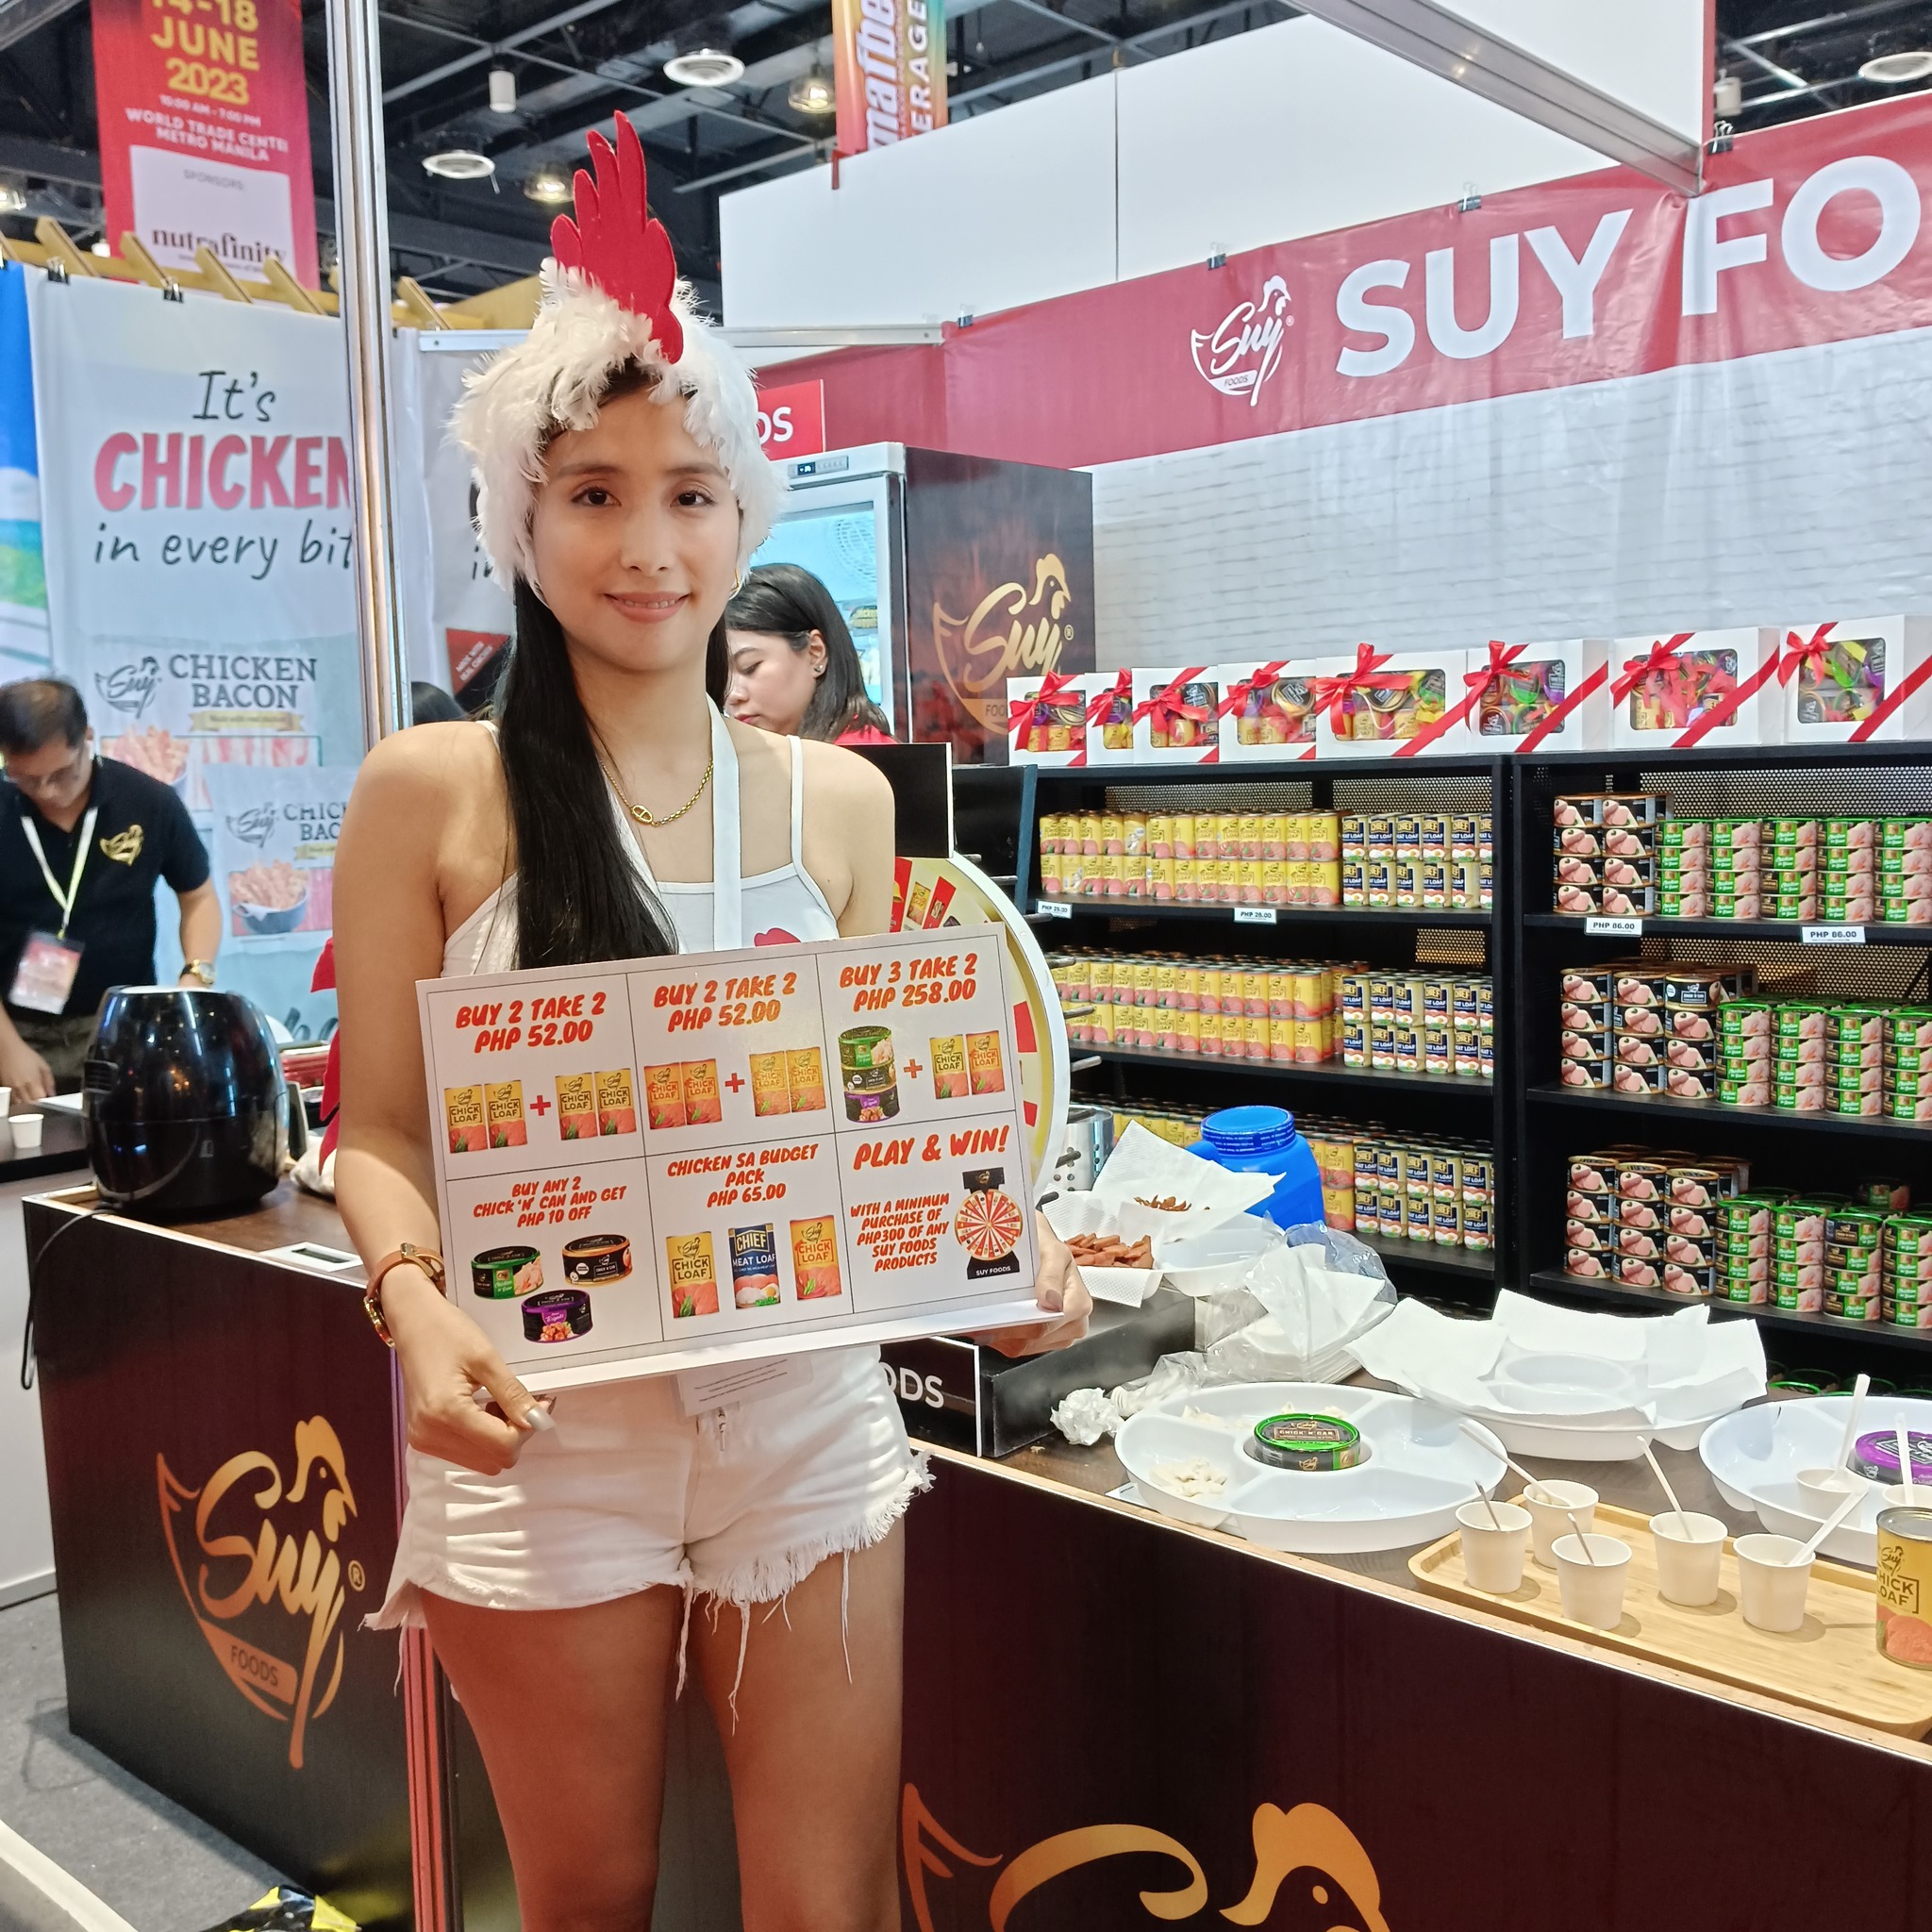 mafbex events with Suy Foods